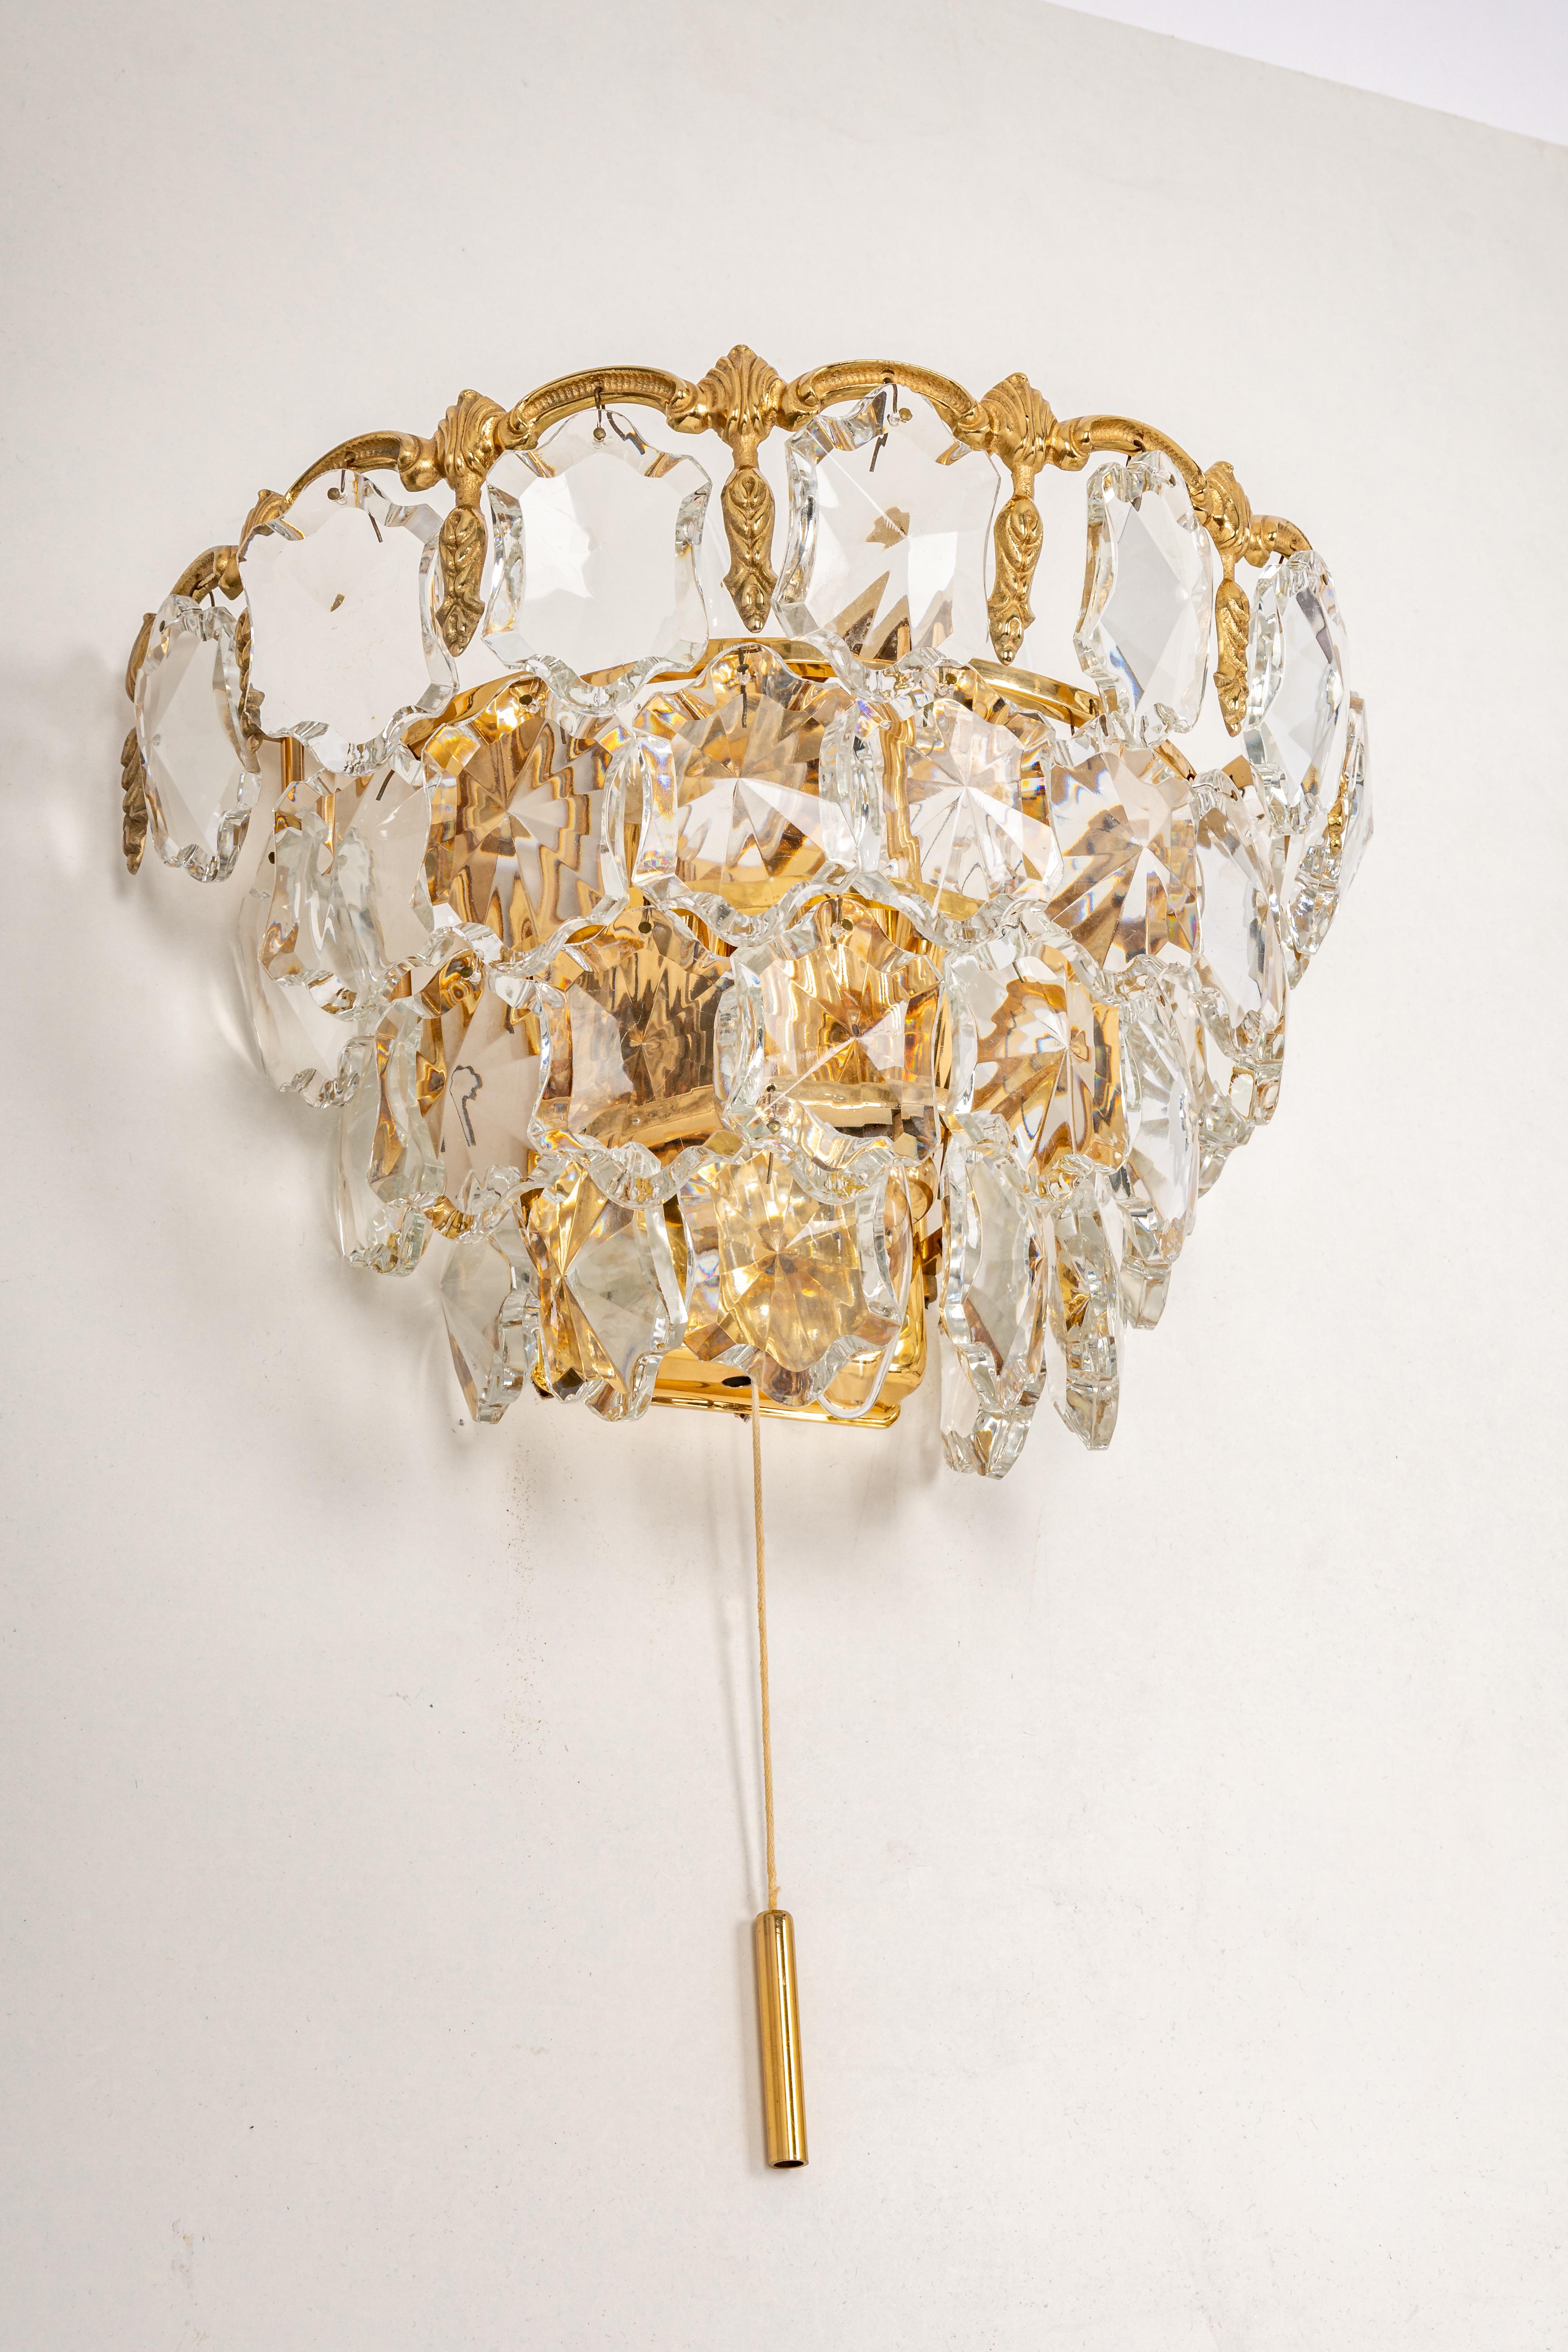 A pair of stunning wall lights made by Bakalowits, Austria, manufactured in circa 1960-1969. A handmade and high quality piece. The frame is made of gilt brass and has 4 tiers with lots of facetted crystal glass elements. 

Sockets: 3 x E14